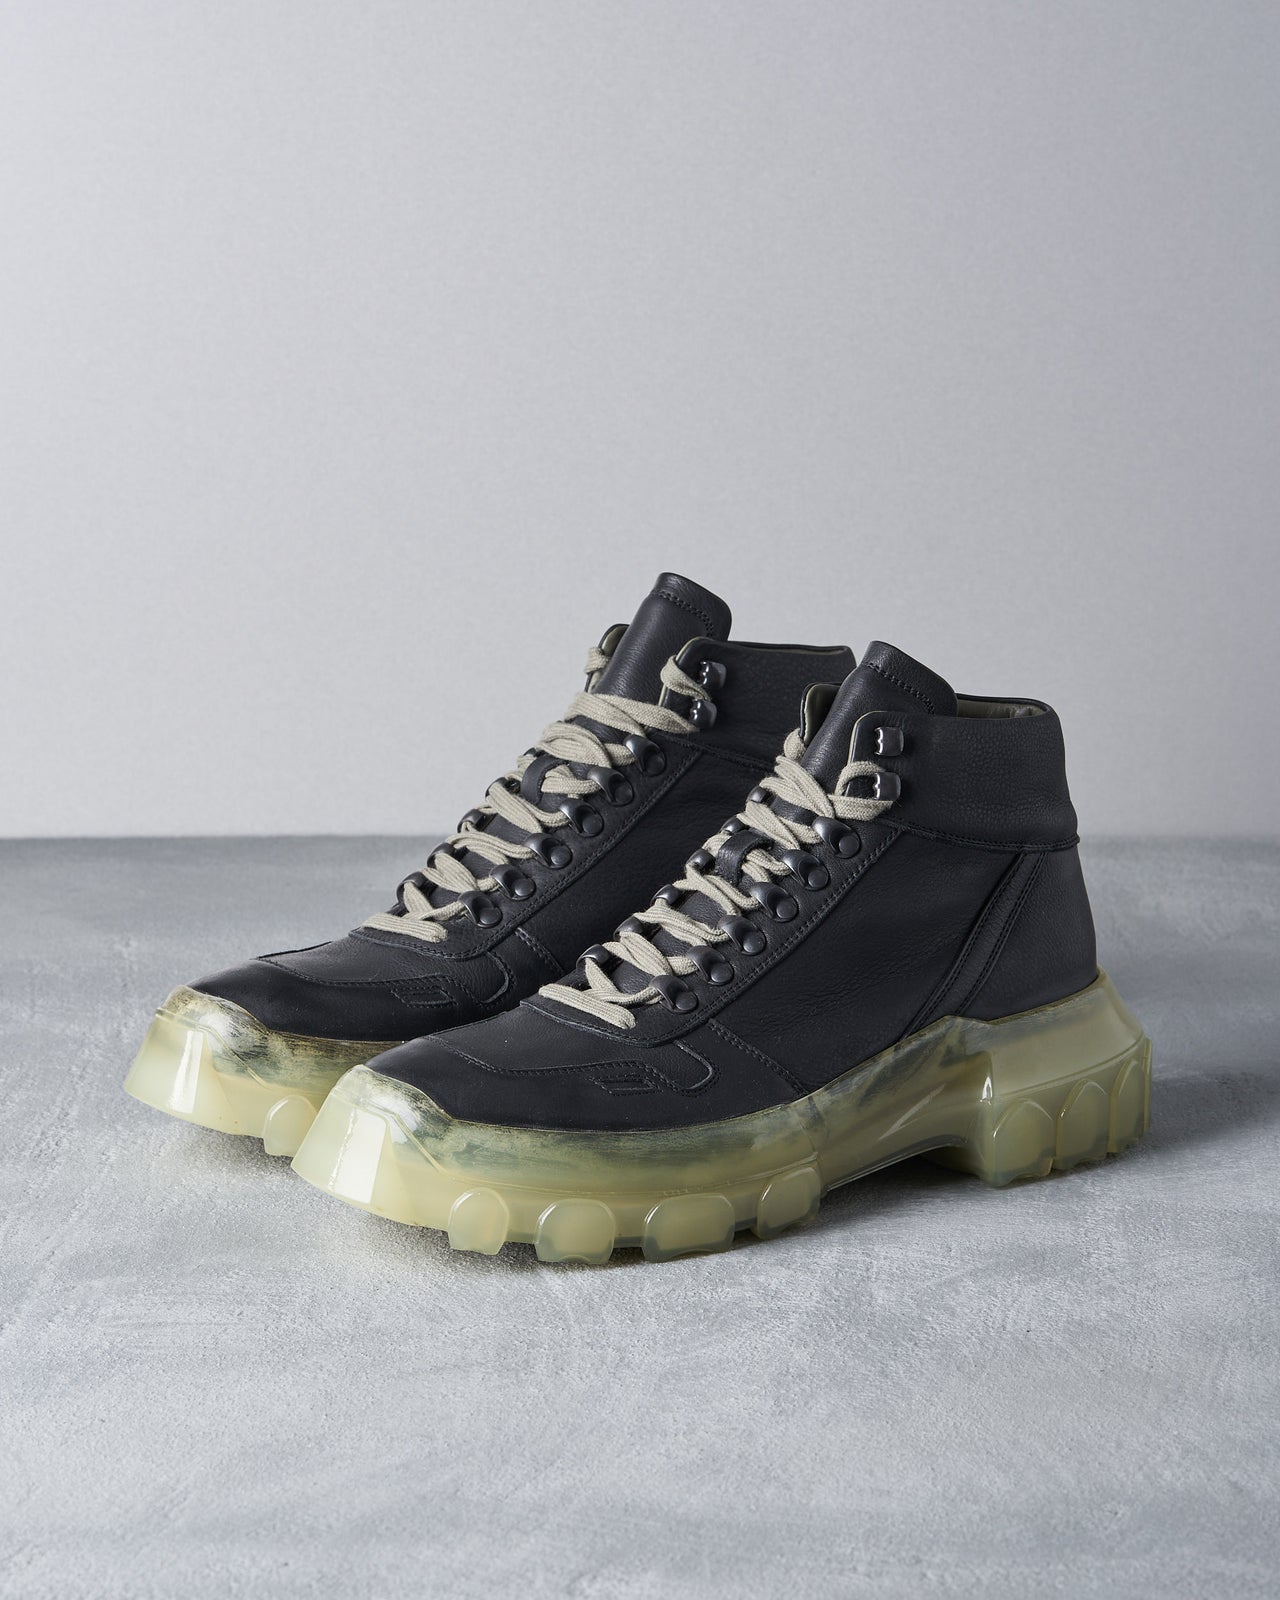 Rick Owens FW 2019 Tractor clear sole boot